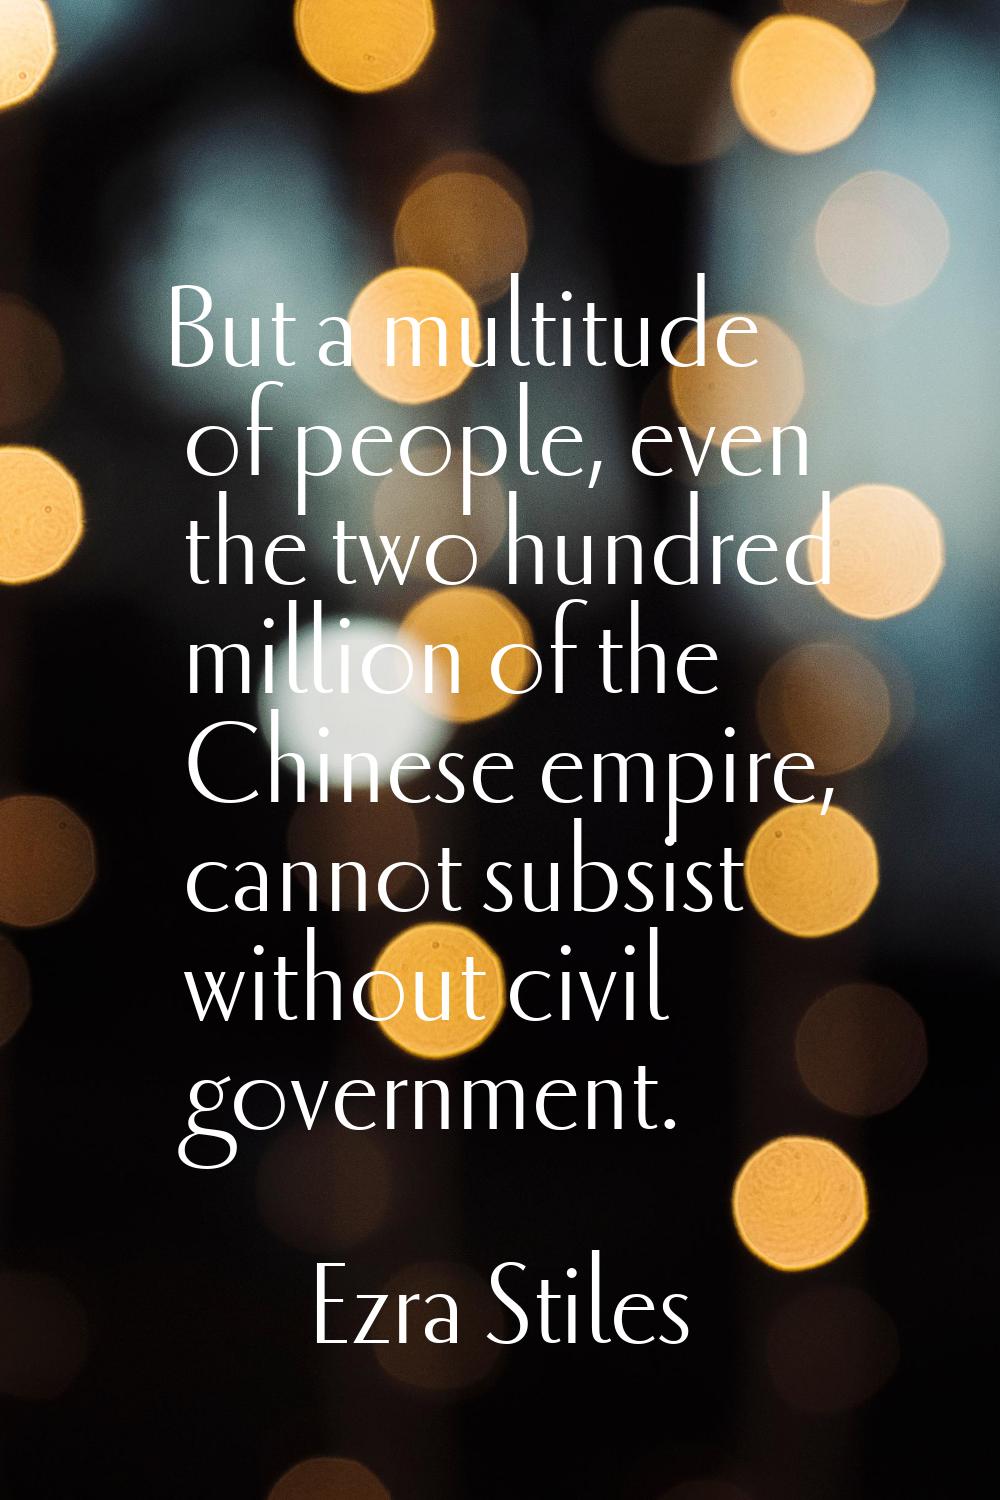 But a multitude of people, even the two hundred million of the Chinese empire, cannot subsist witho